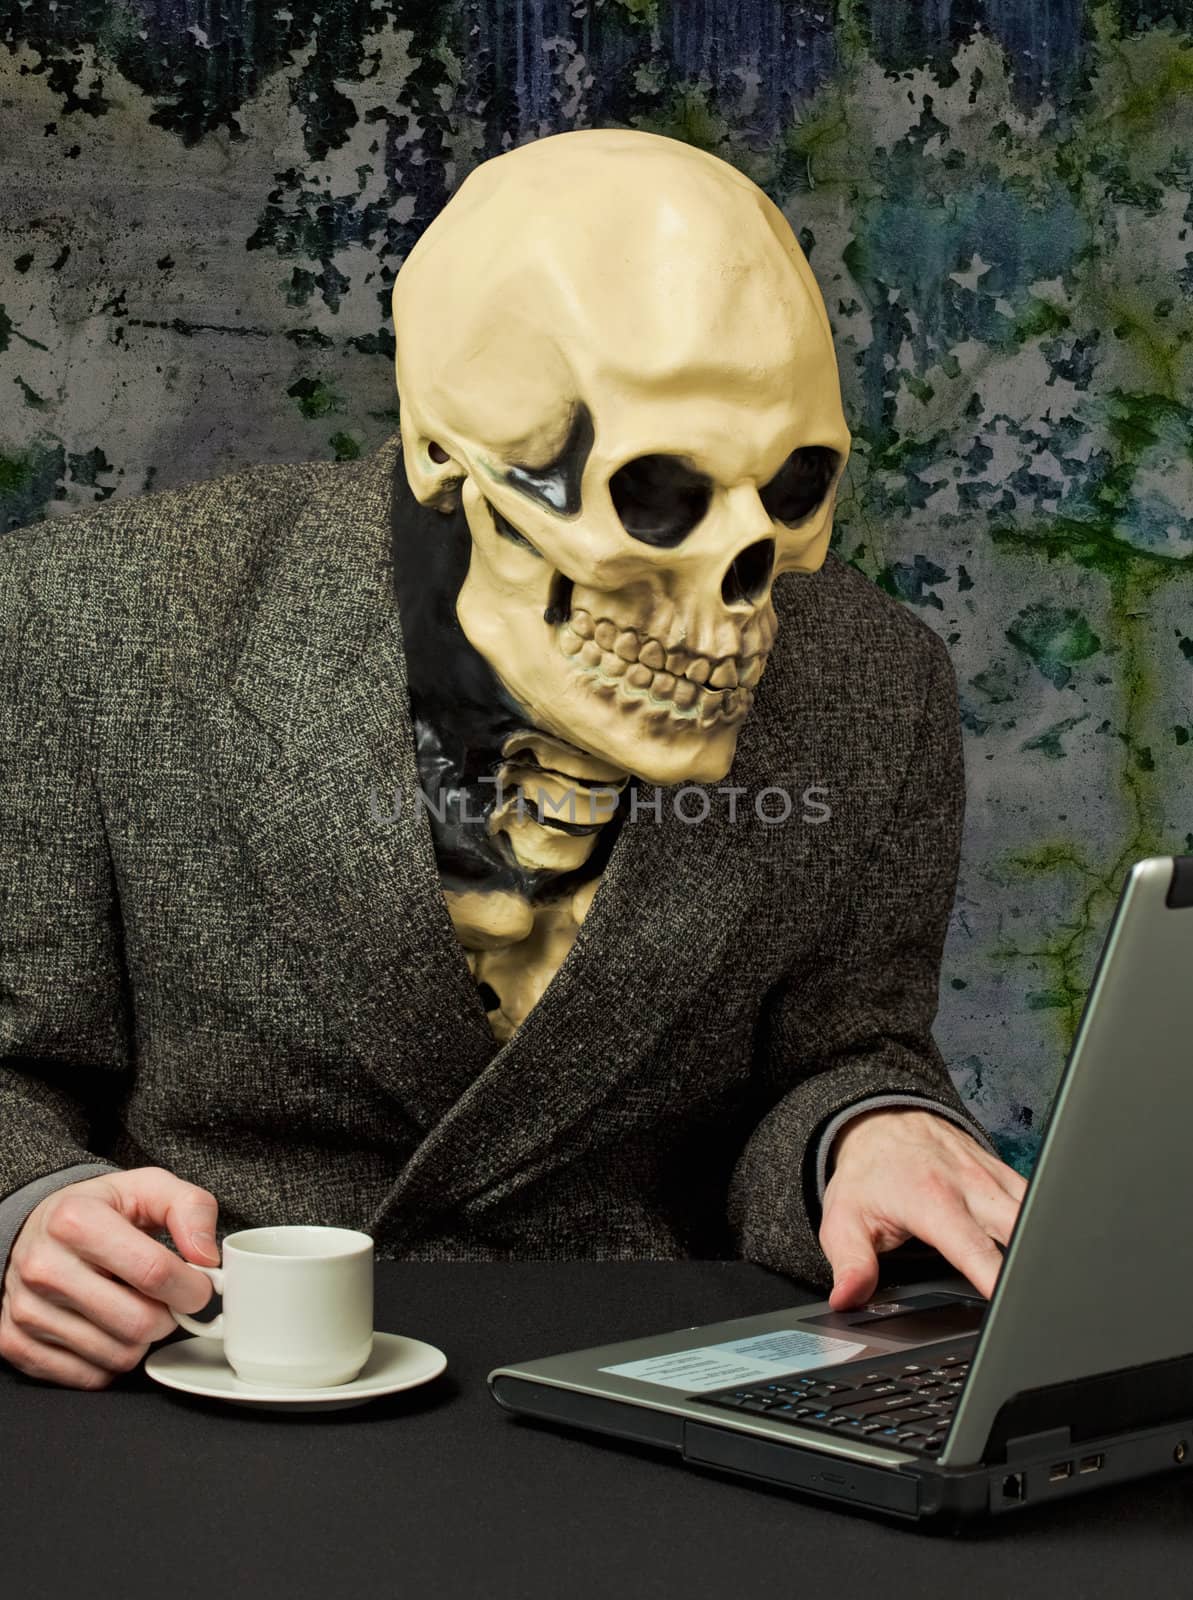 The terrible person - a skeleton uses the Internet